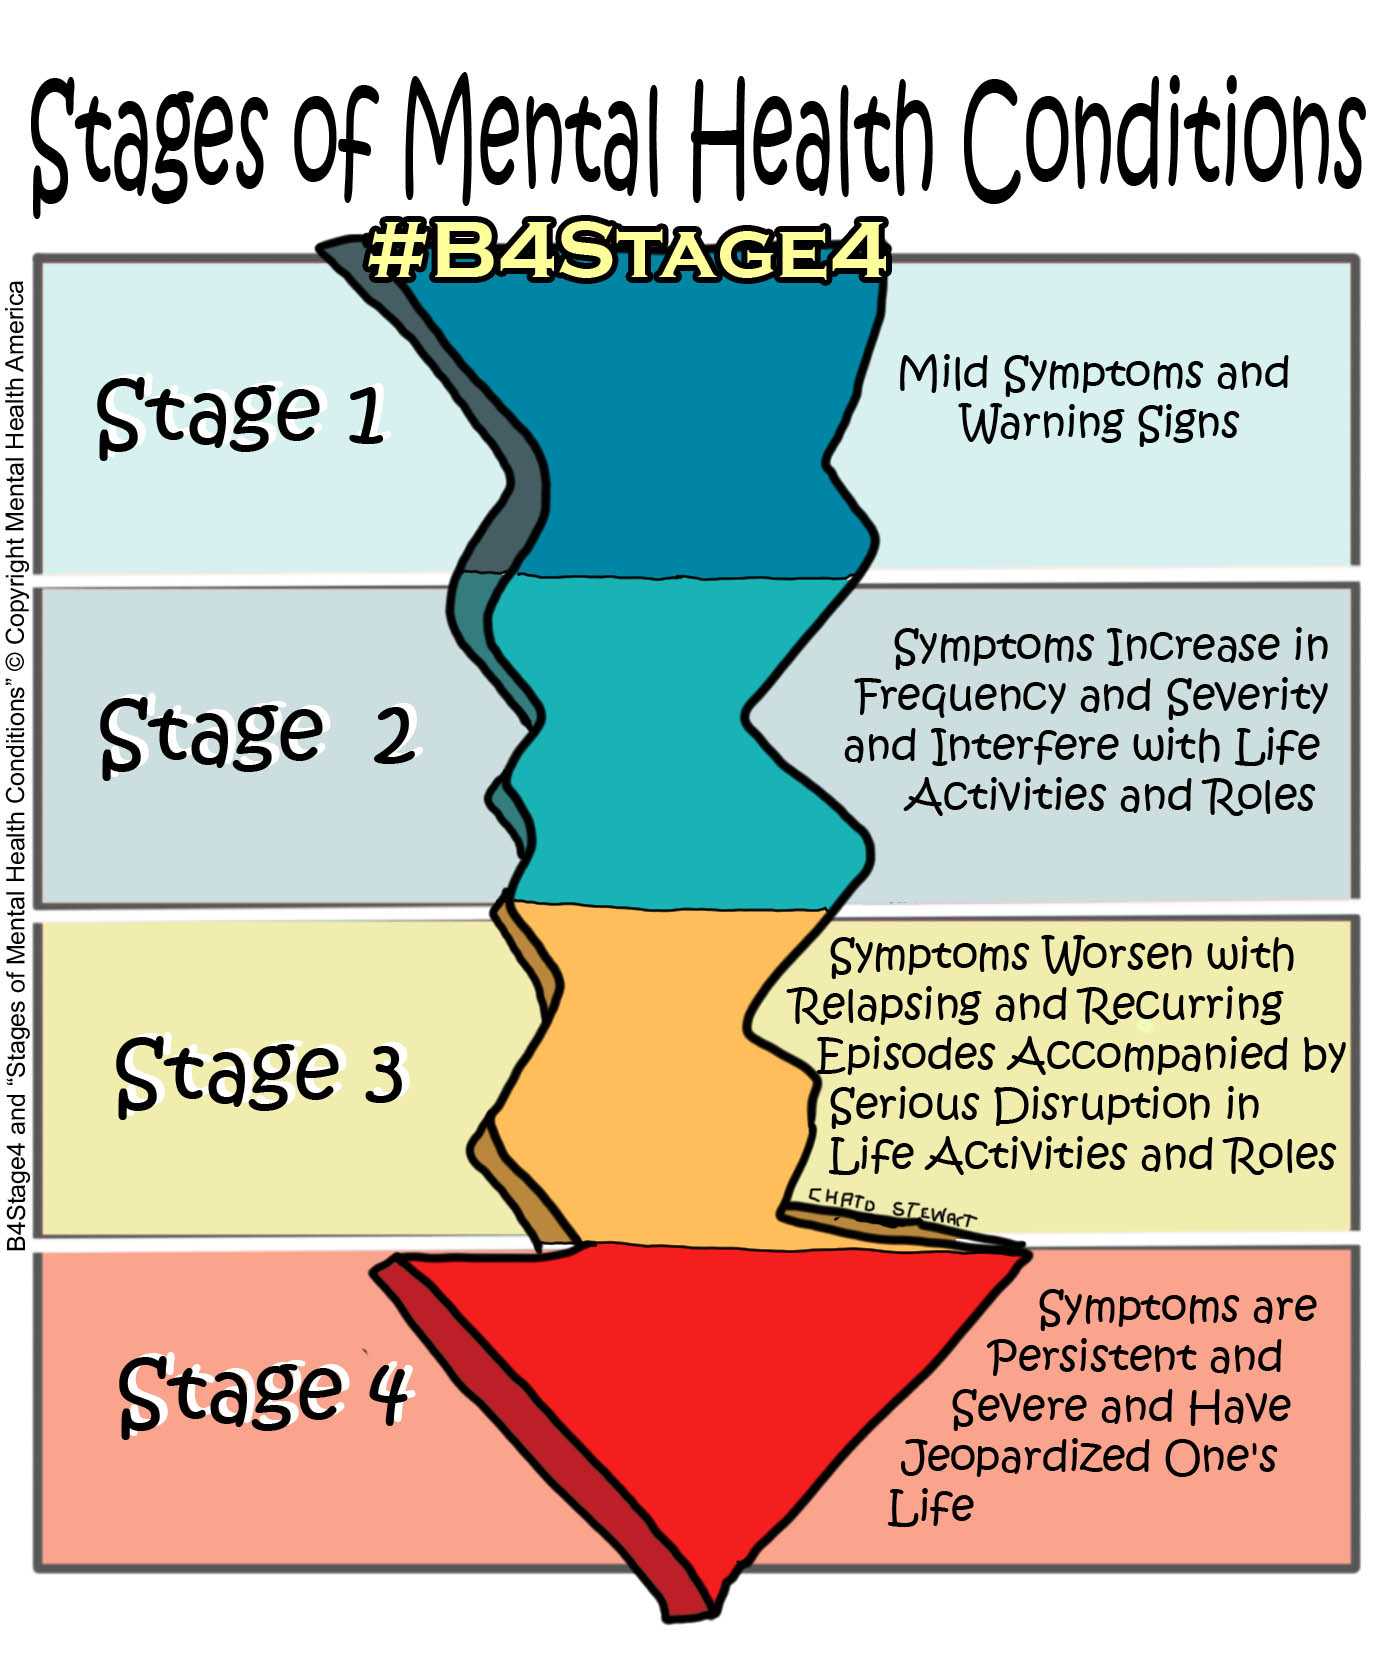 Stages of Mental Health Conditions